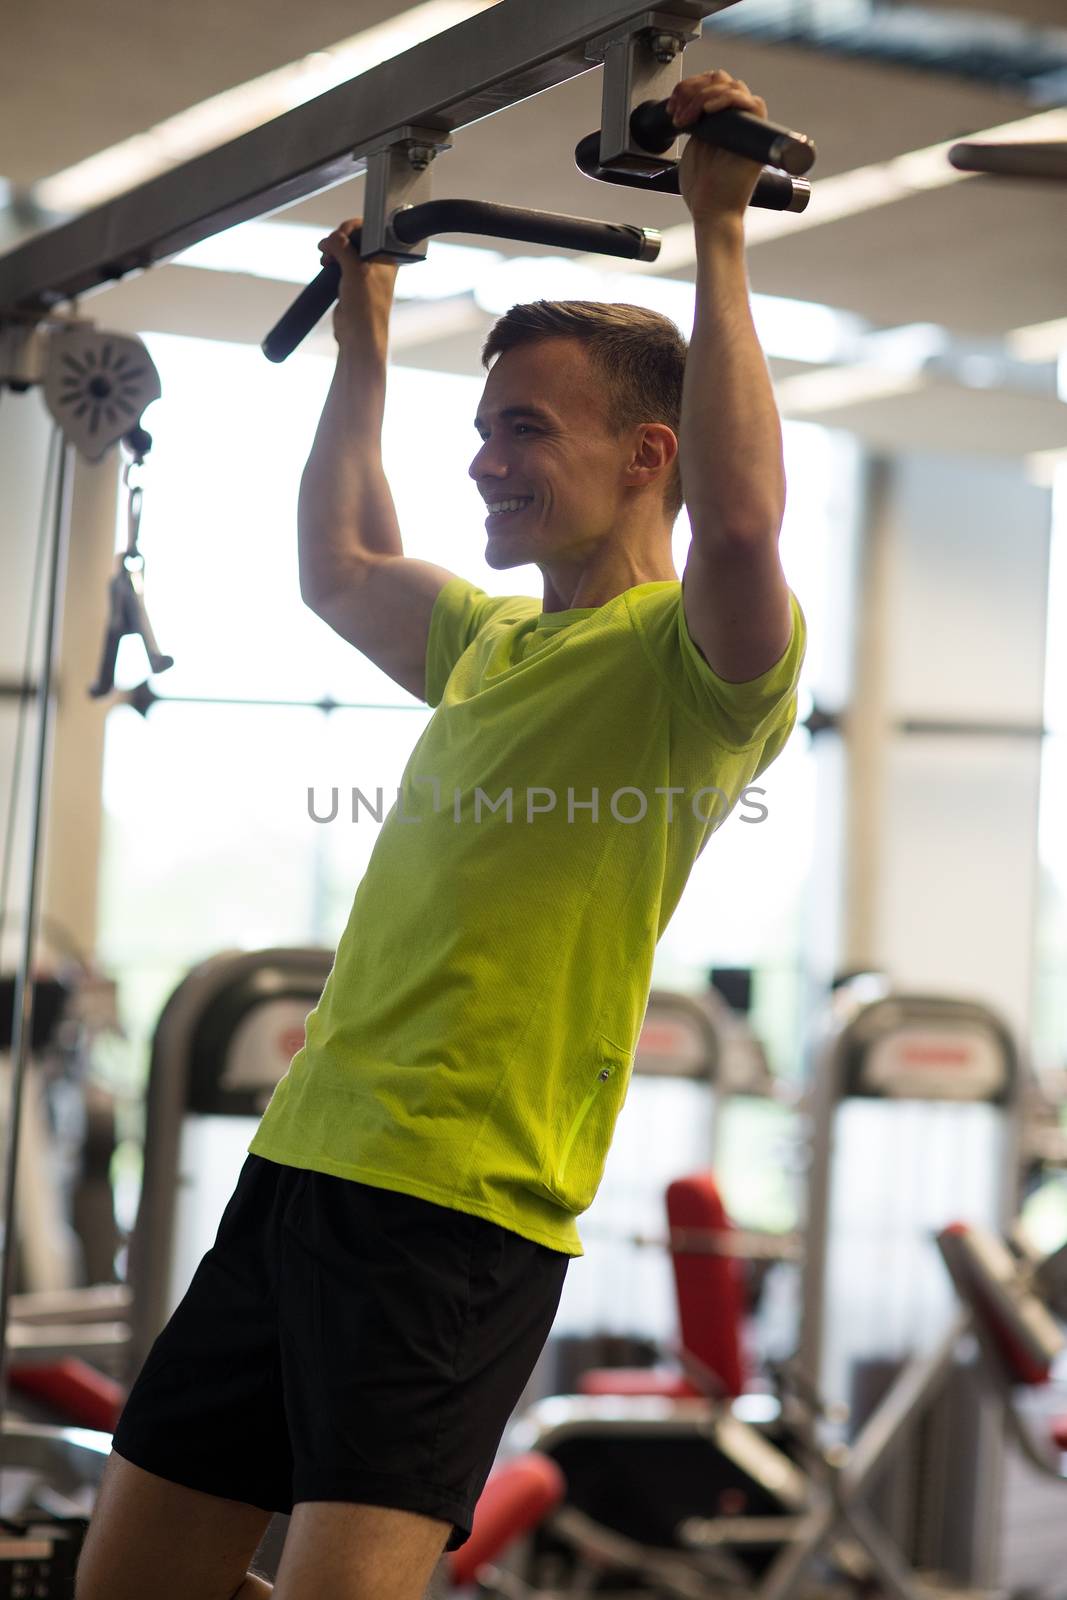 sport, fitness, lifestyle and people concept - smiling man doing pull-ups in gym